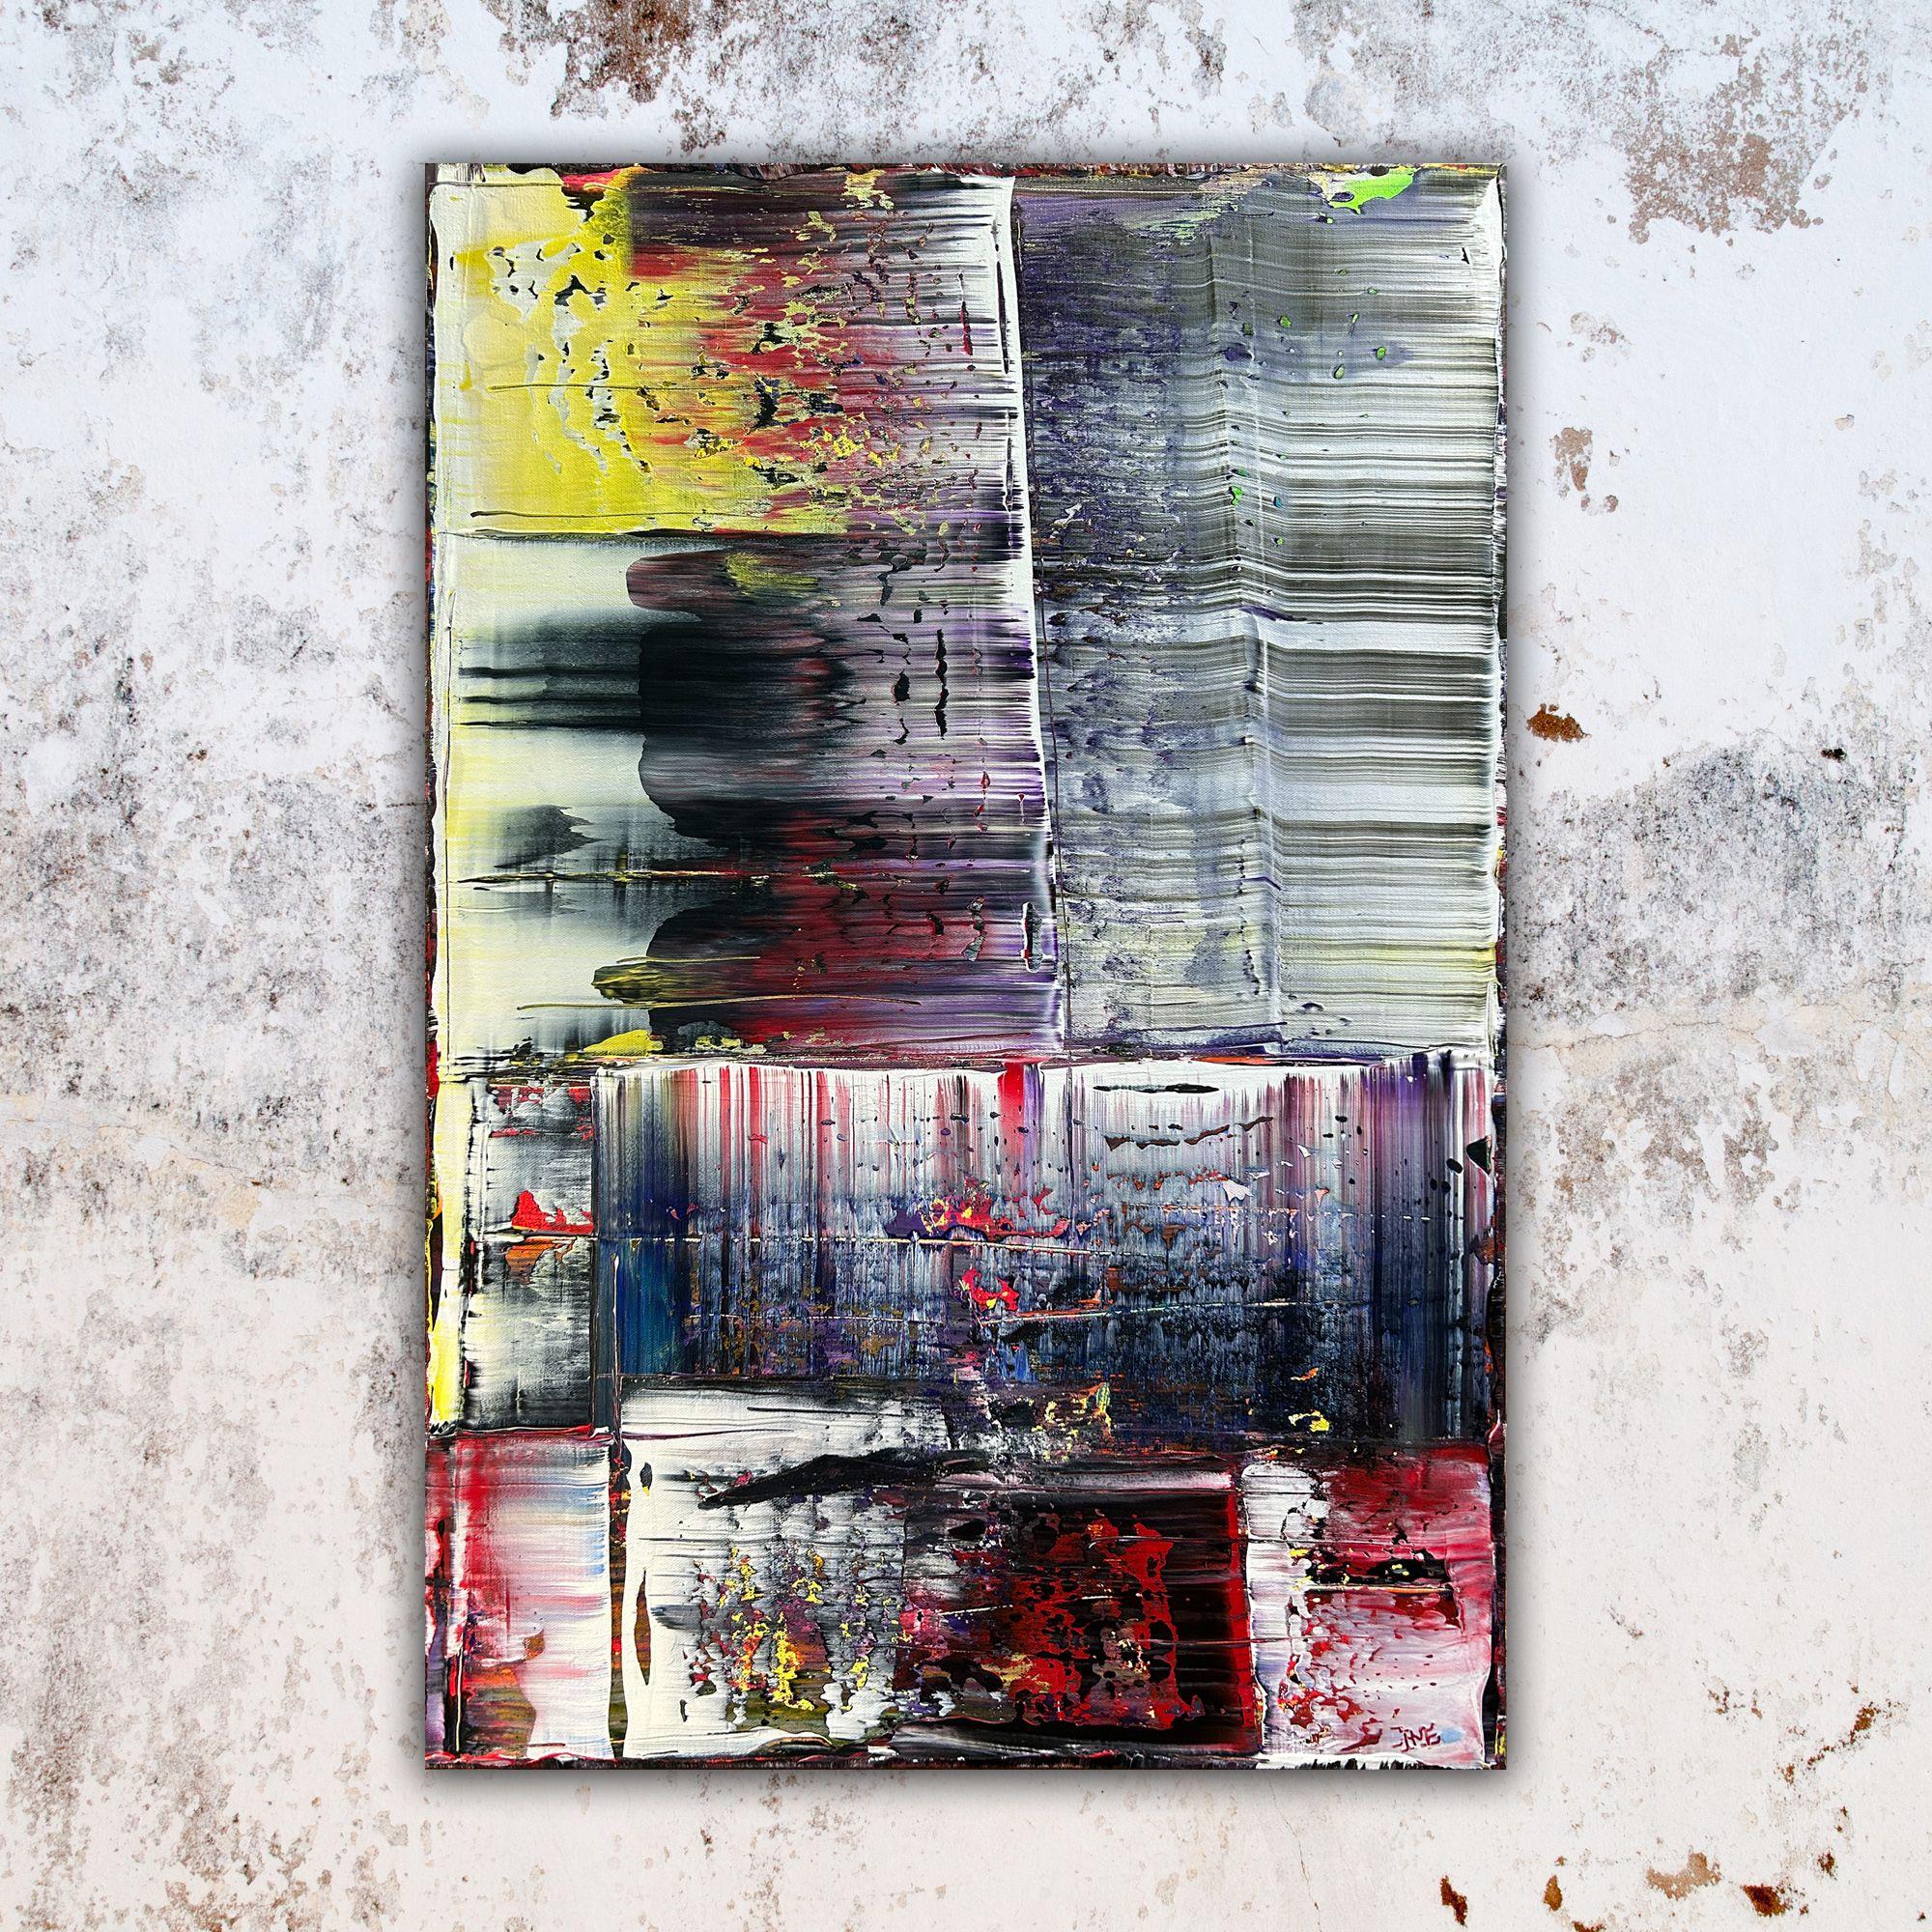 This is a gallery quality, PMS abstract acrylic painting for your home or office. It was painted with the highest quality materials and will make a statement in your space. This piece has a mature, energetic and vibrant neutral design aesthetic. The